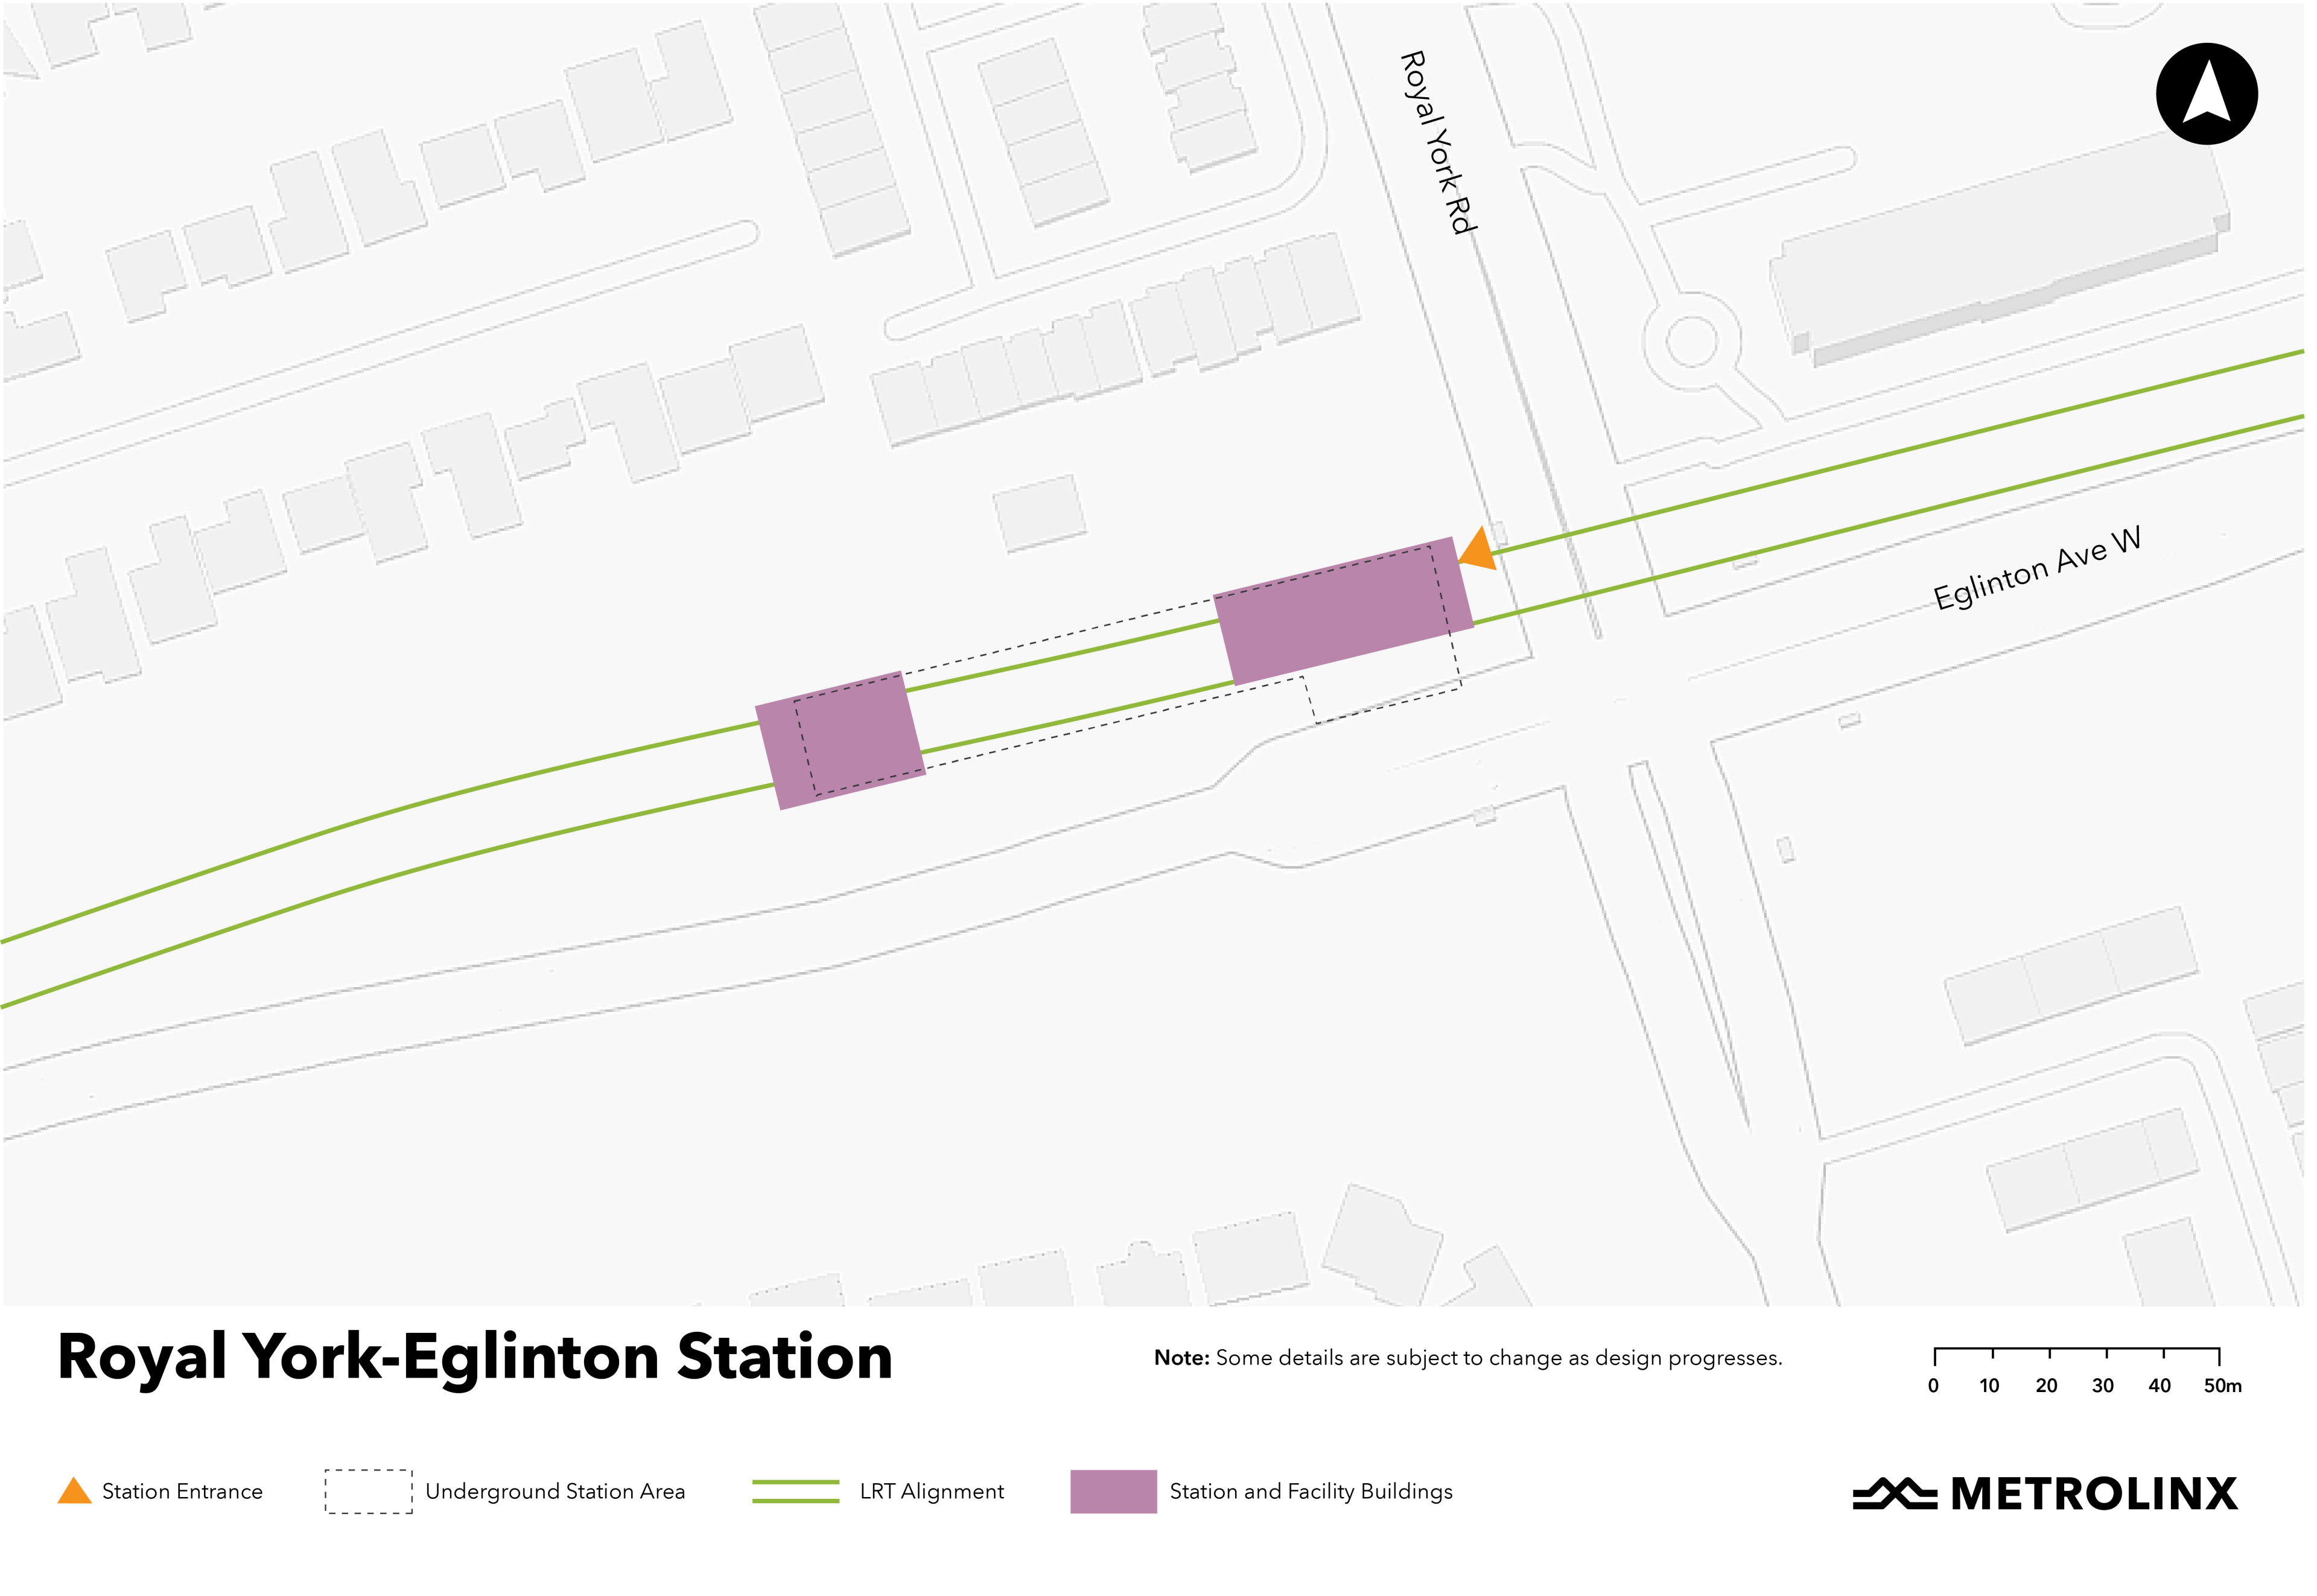 A map of the area around the future Royal York-Eglinton Station